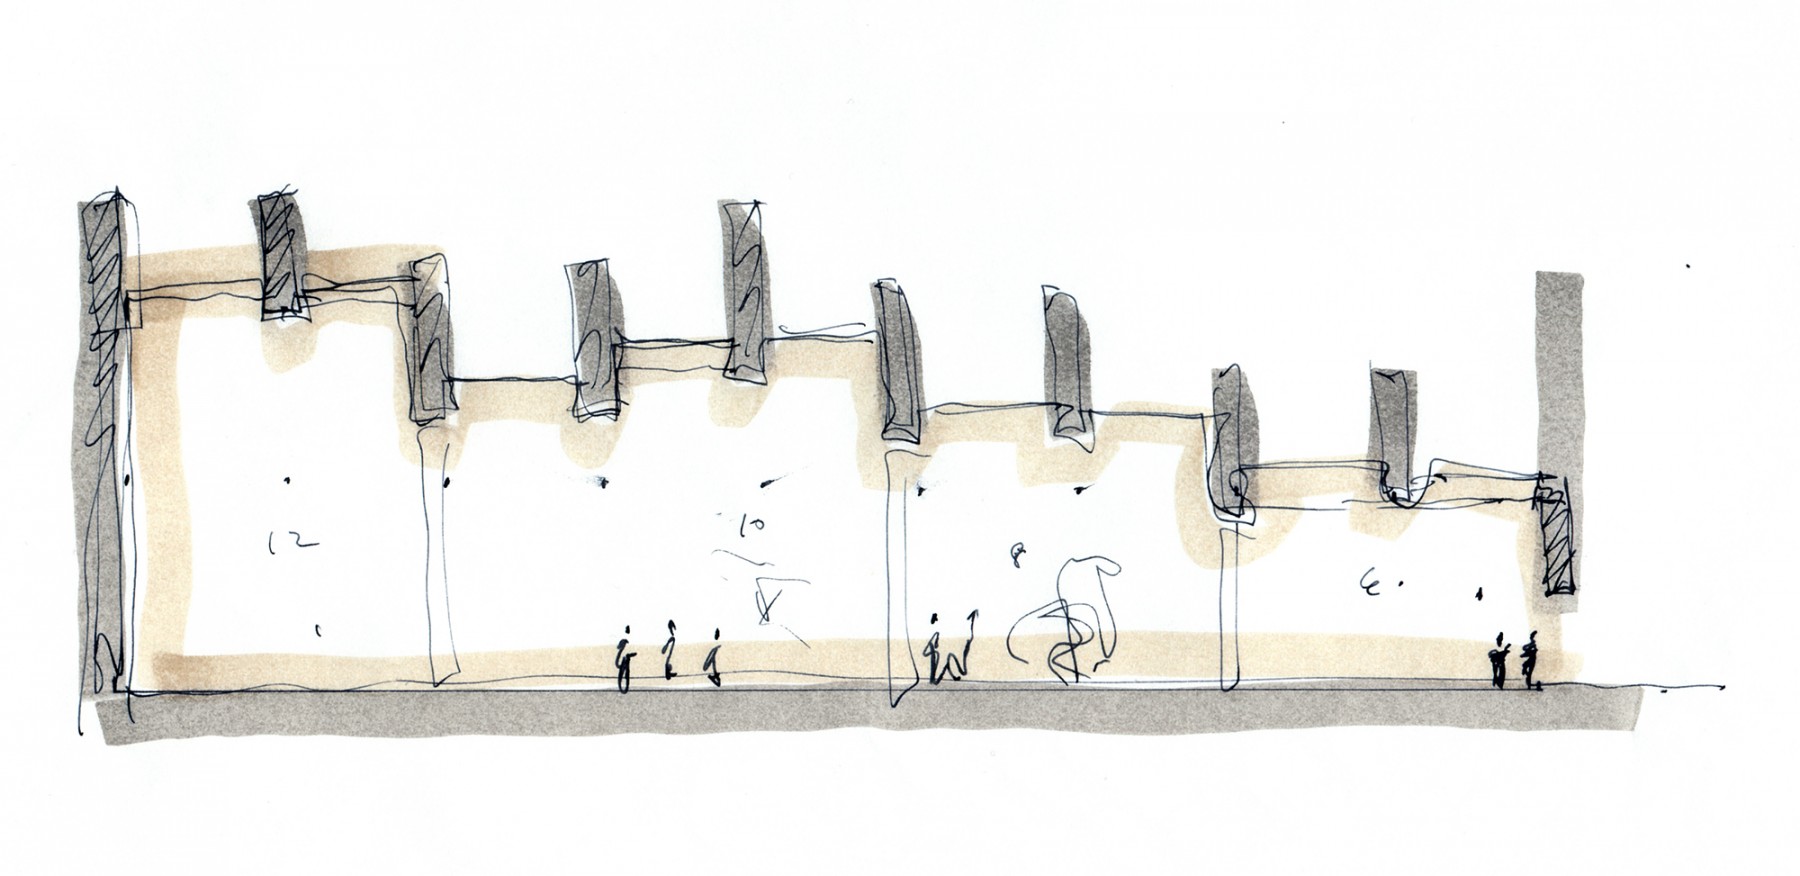 Victoria-and-Albert-Museum-V&A-competition-Exhibition-Road-gallery-London-Sir-Aston-Webb-design-short-list-Jamie-Fobert-architects-sketch